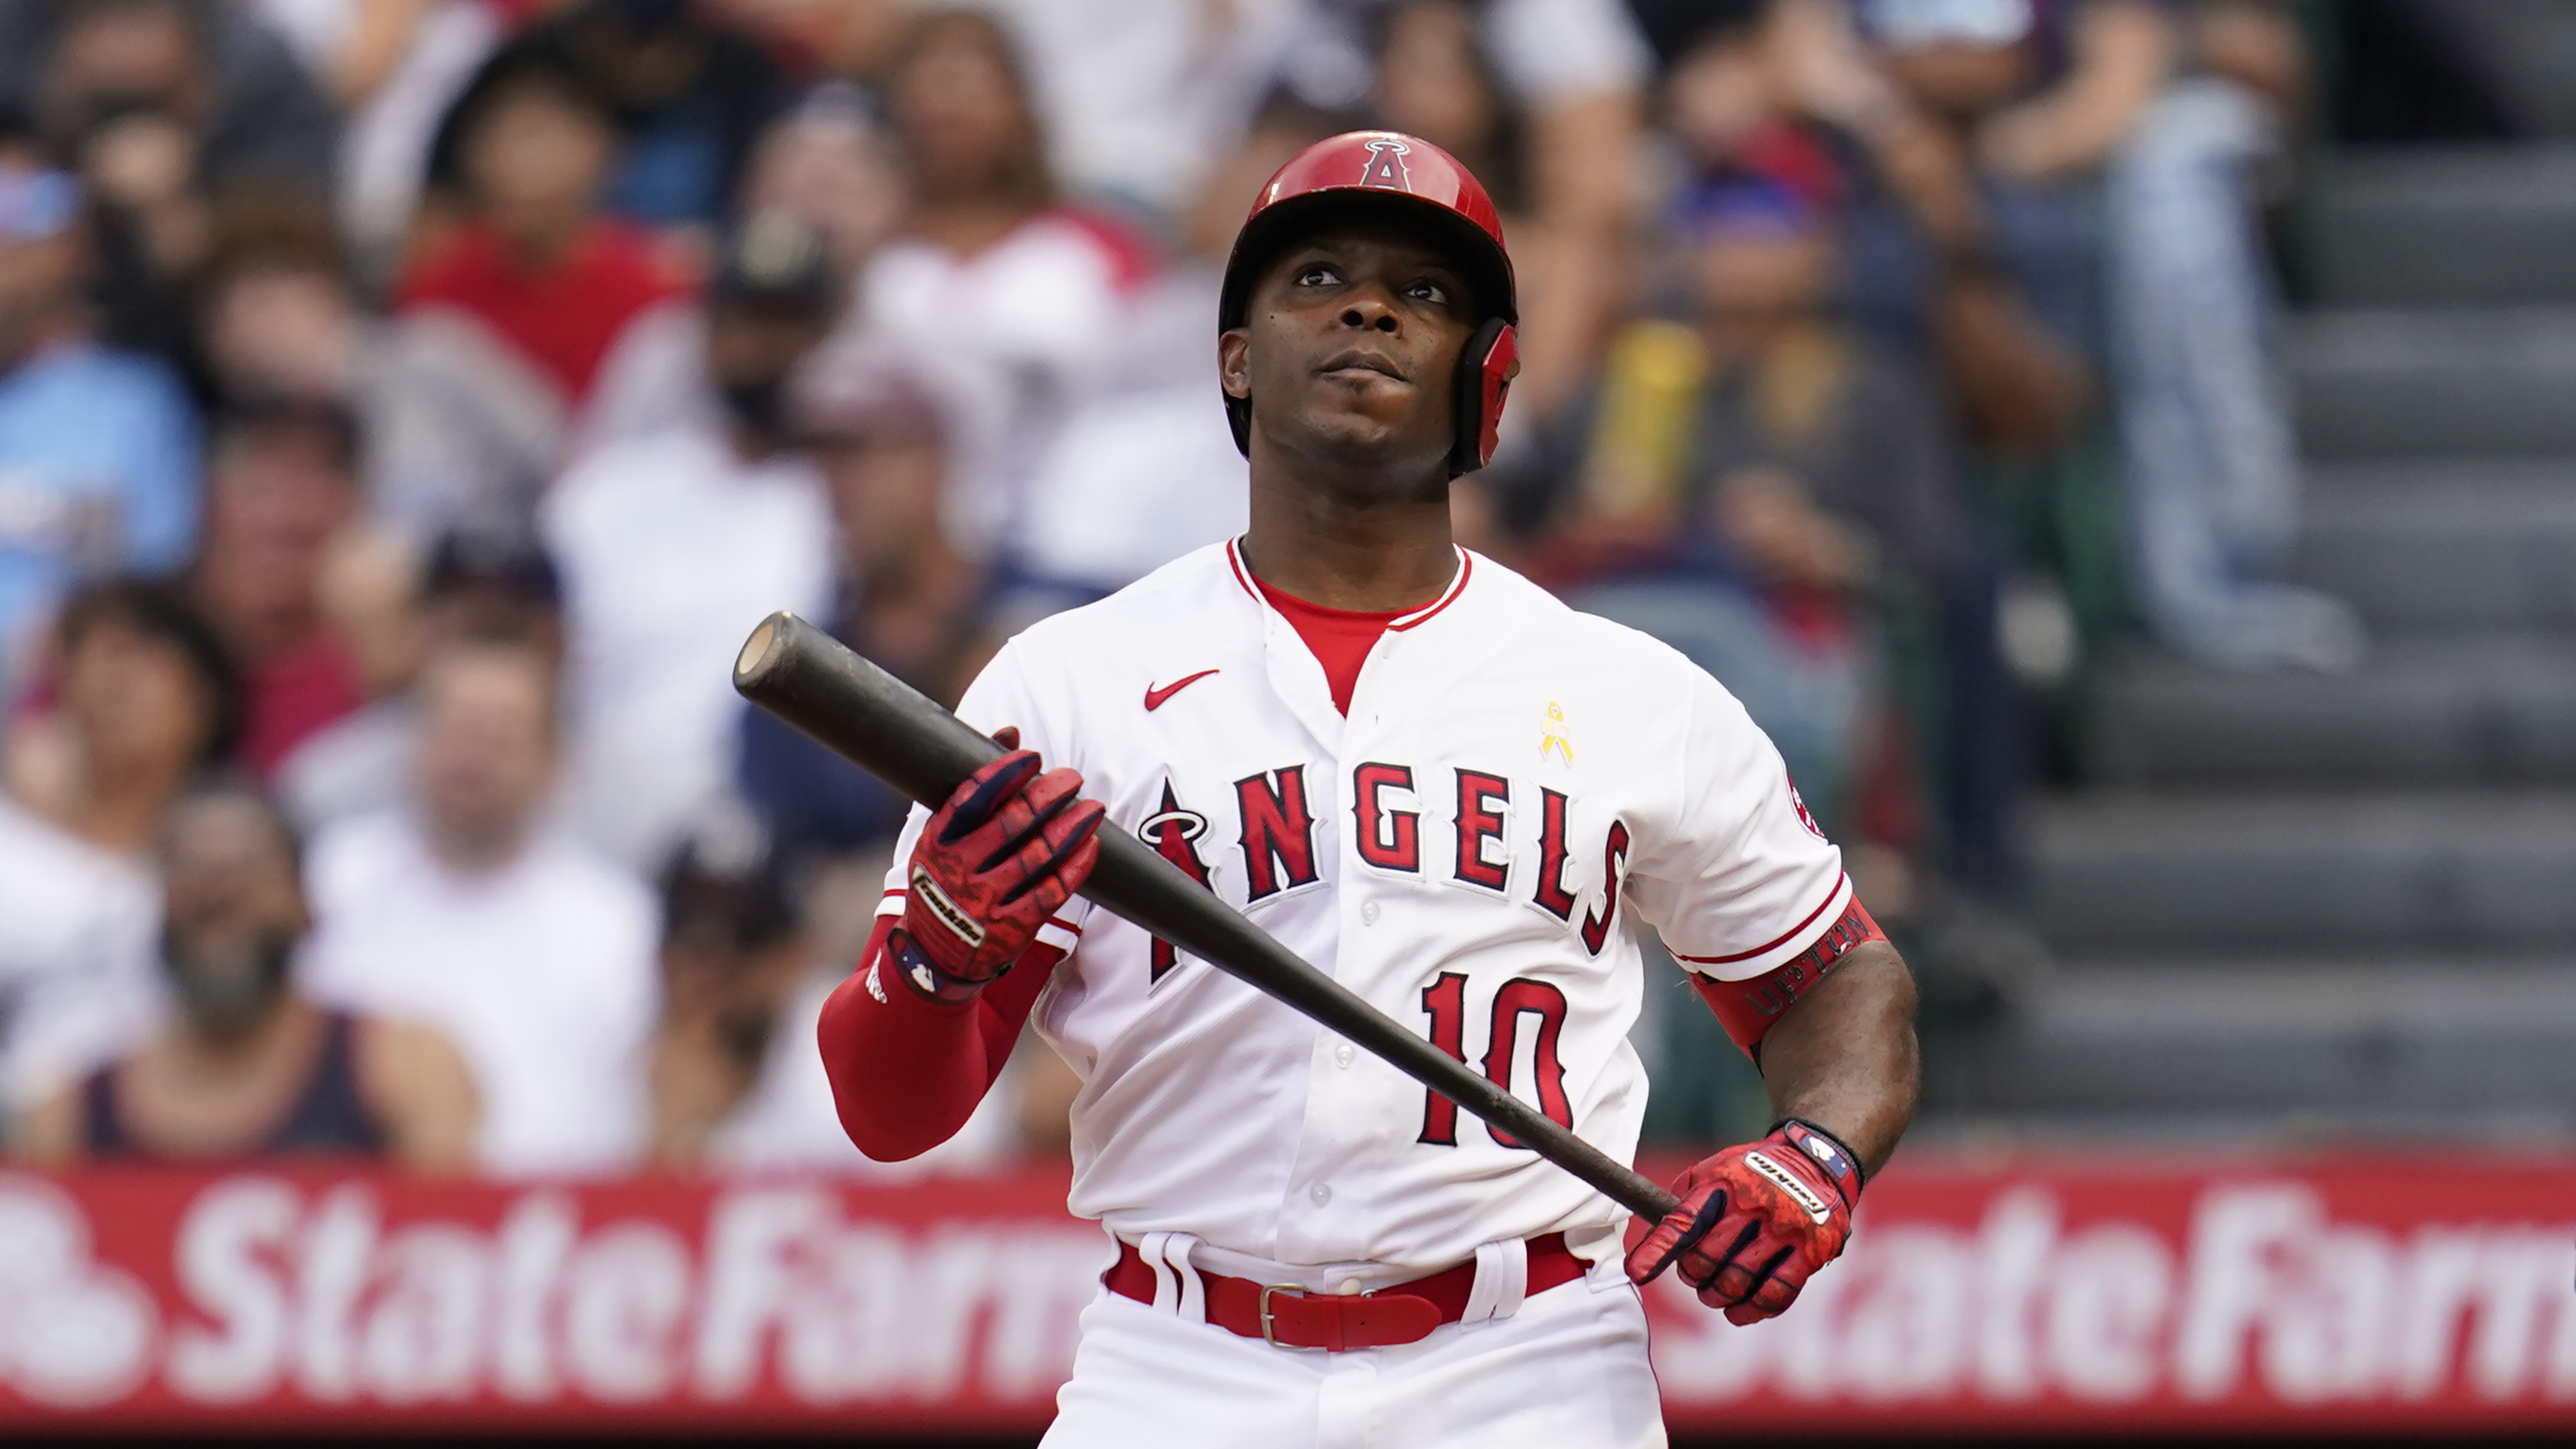 Report: Justin Upton Designated for Assignment by Angels; OF Owed $28M in 2022